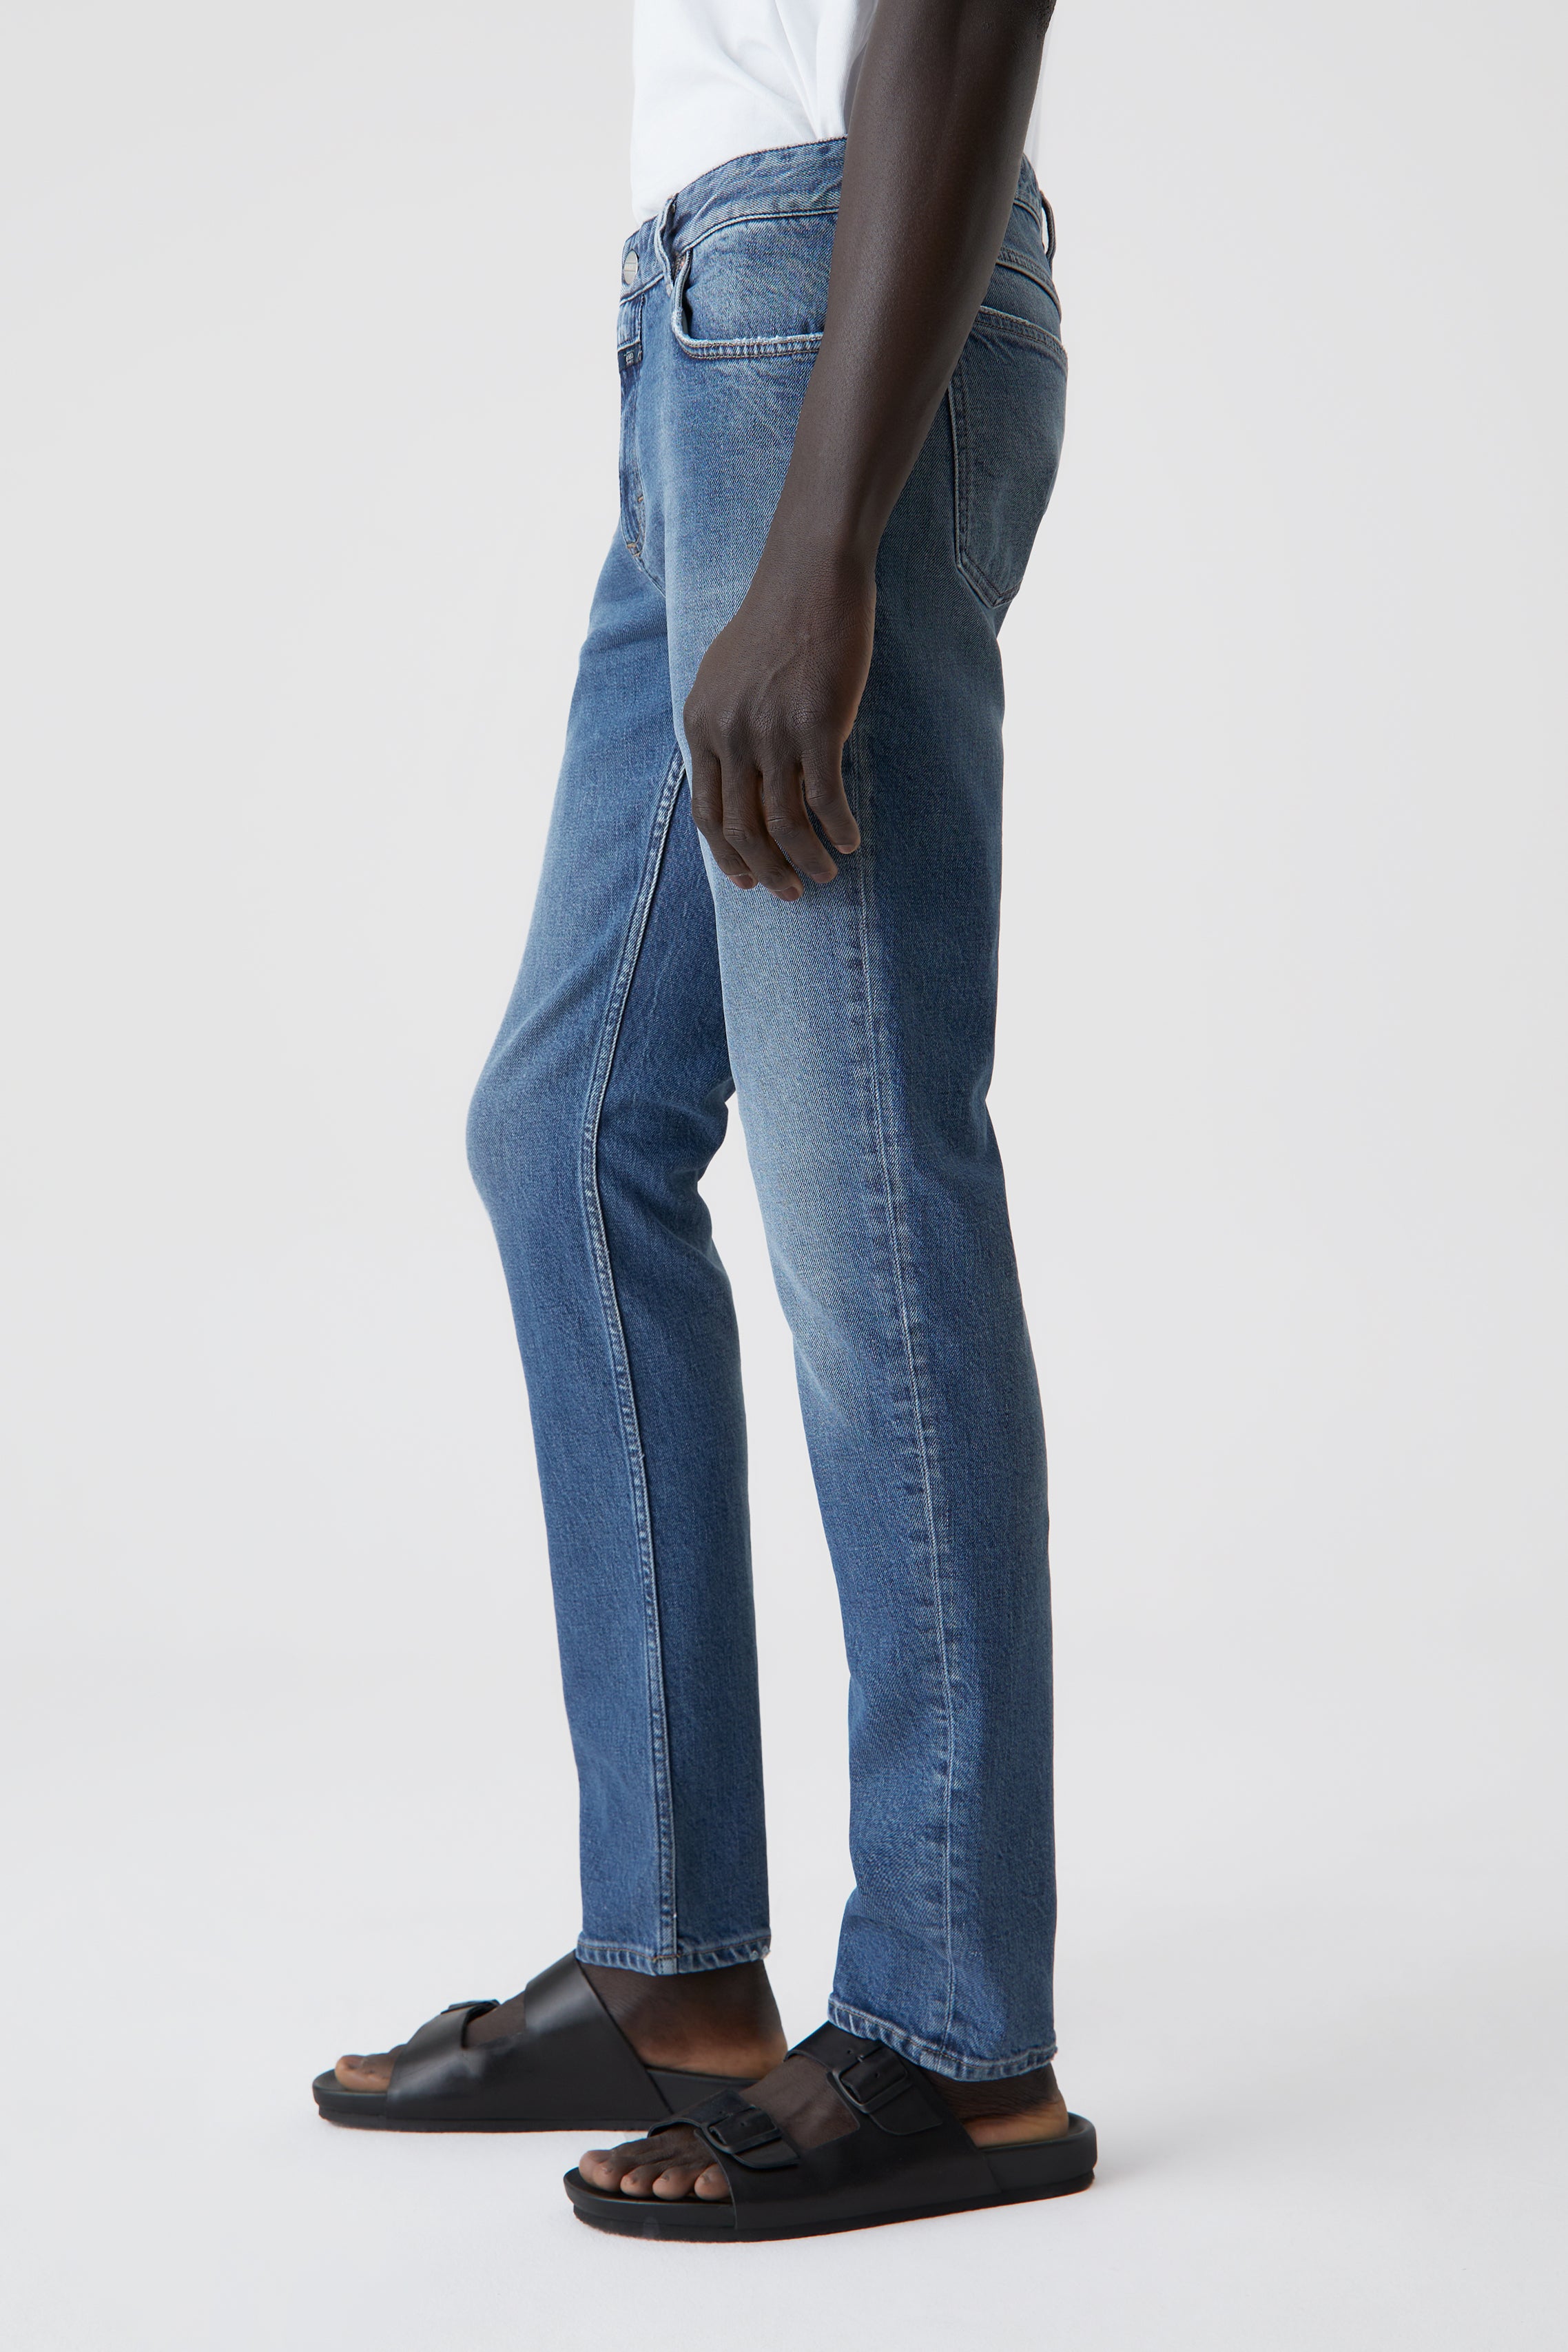 STYLE NAME UNITY SLIM JEANS